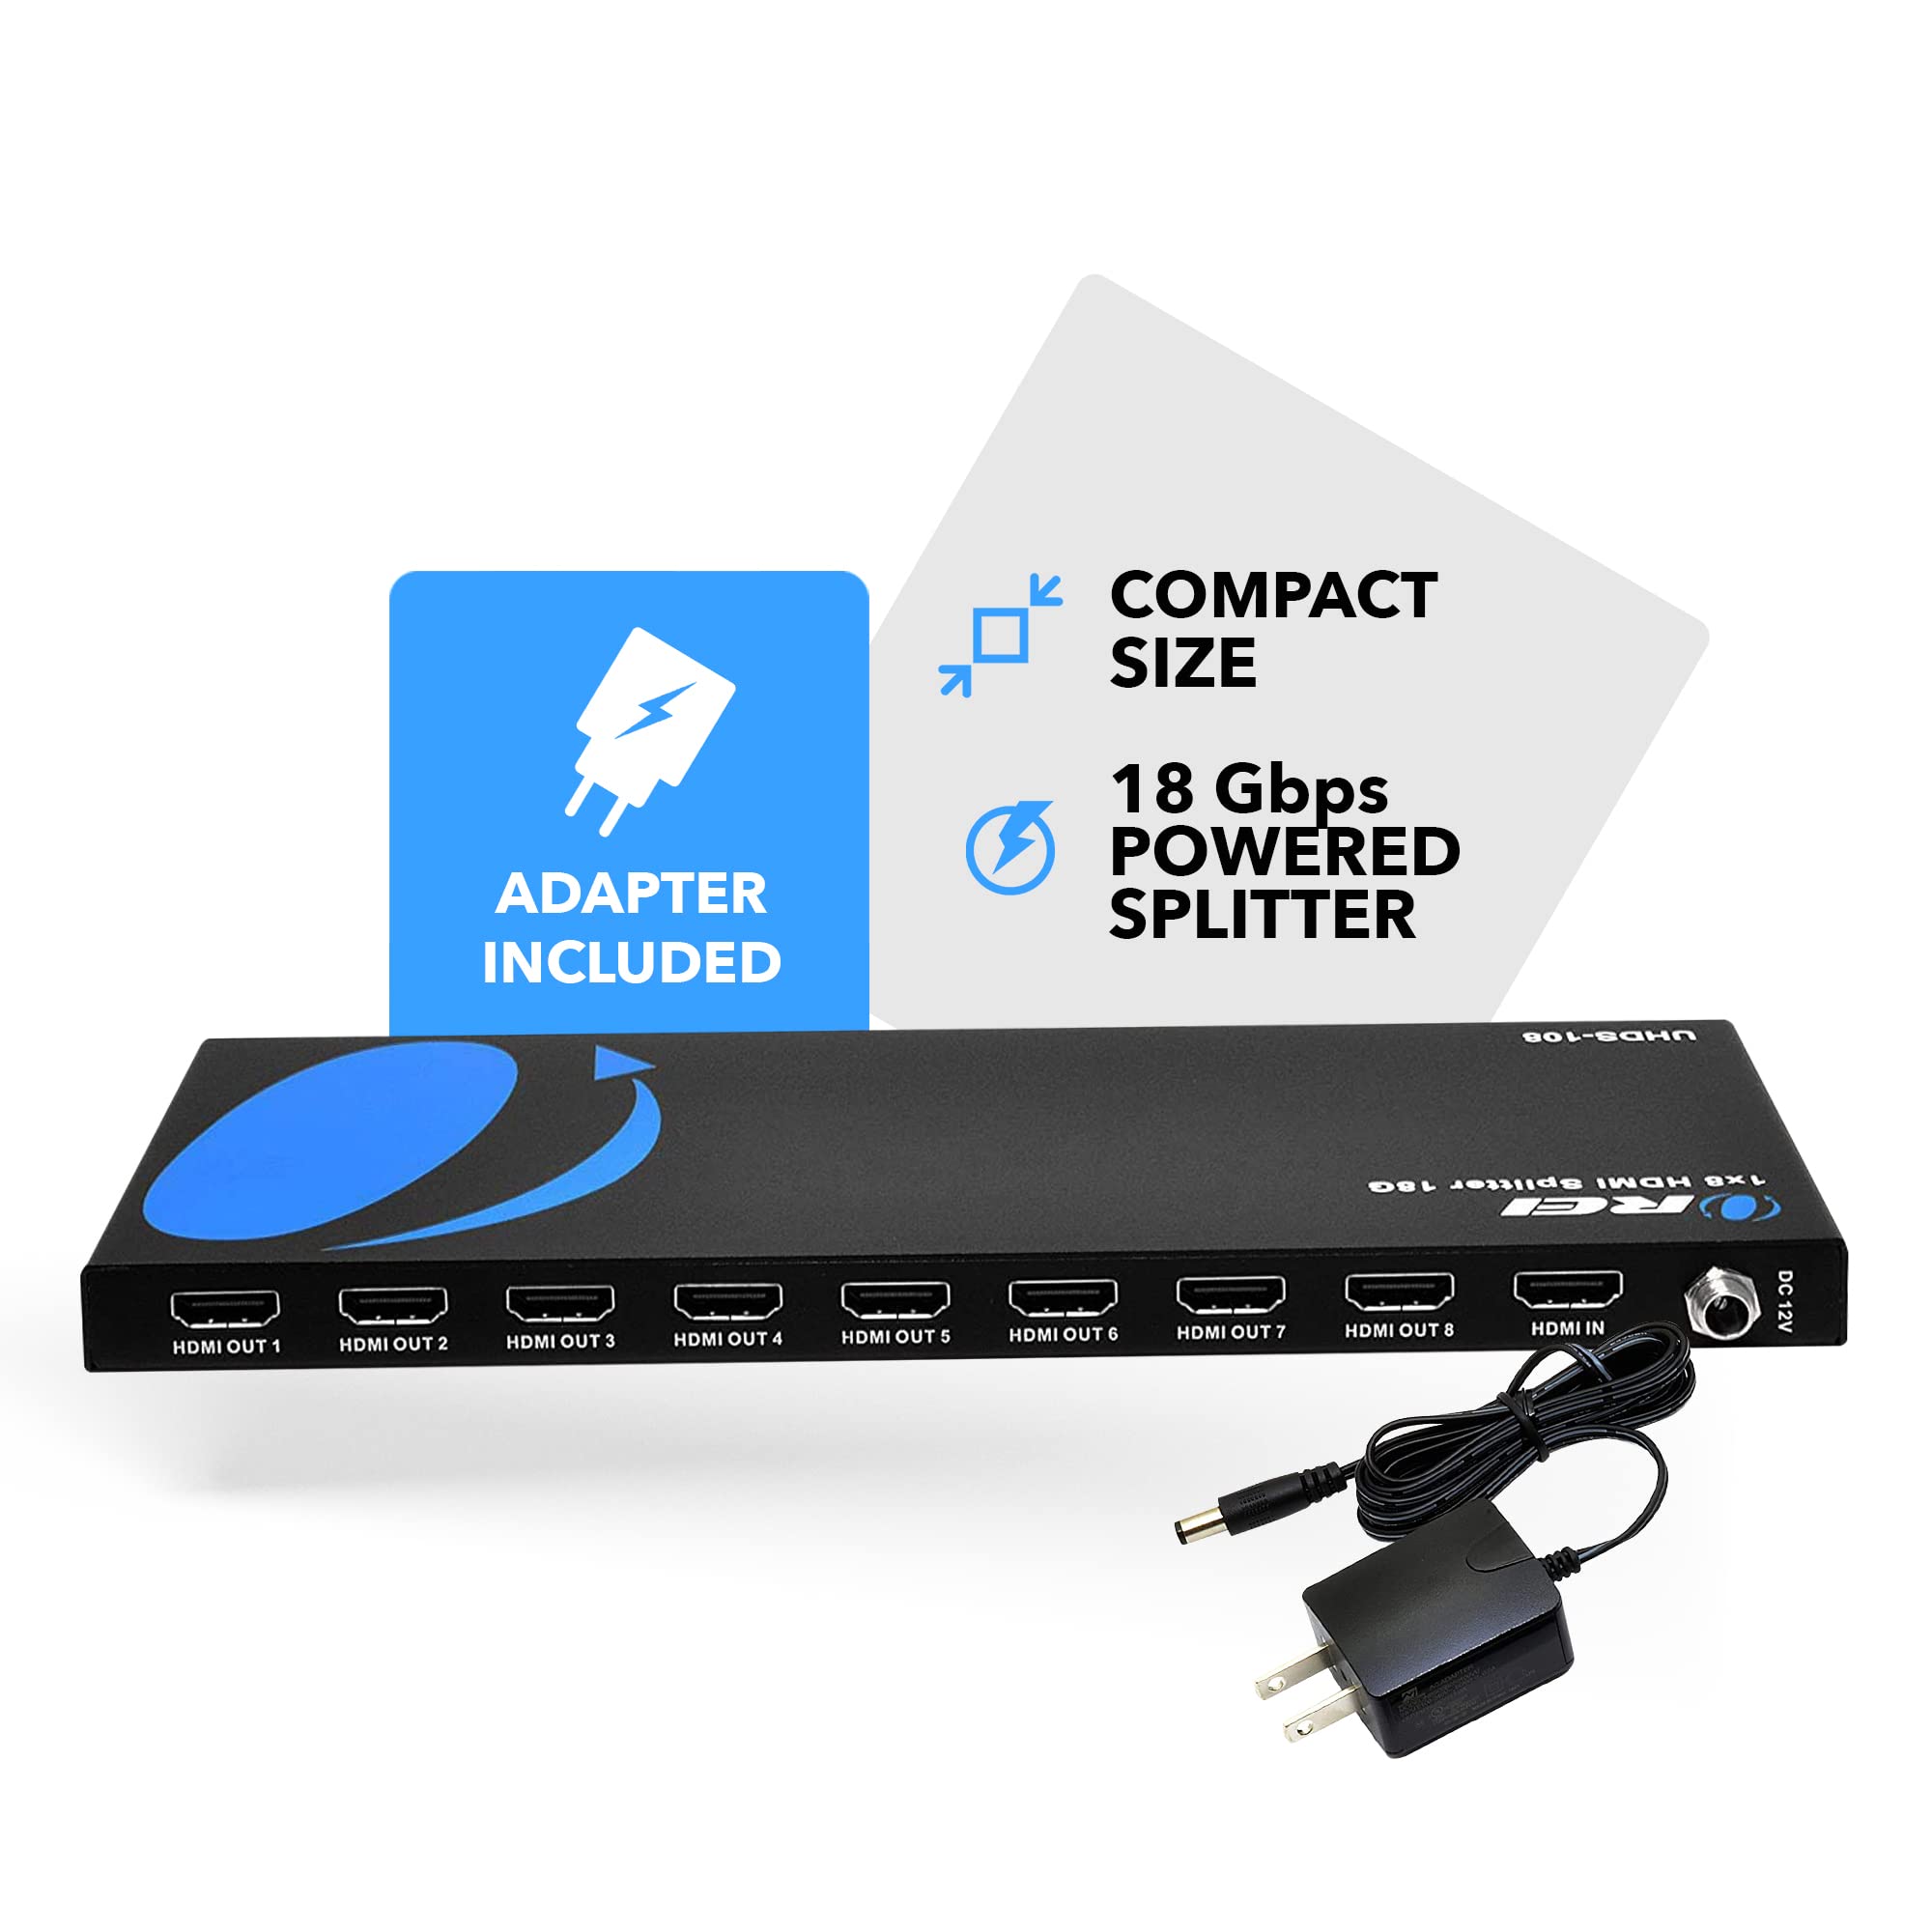 OREI 1x8 2.0 HDMI Splitter 1 in 8 Out Ports with Full Ultra HDCP 2.2, 4K at 60Hz & 3D Supports EDID Control - Upto 30 Feet HDMI Cable